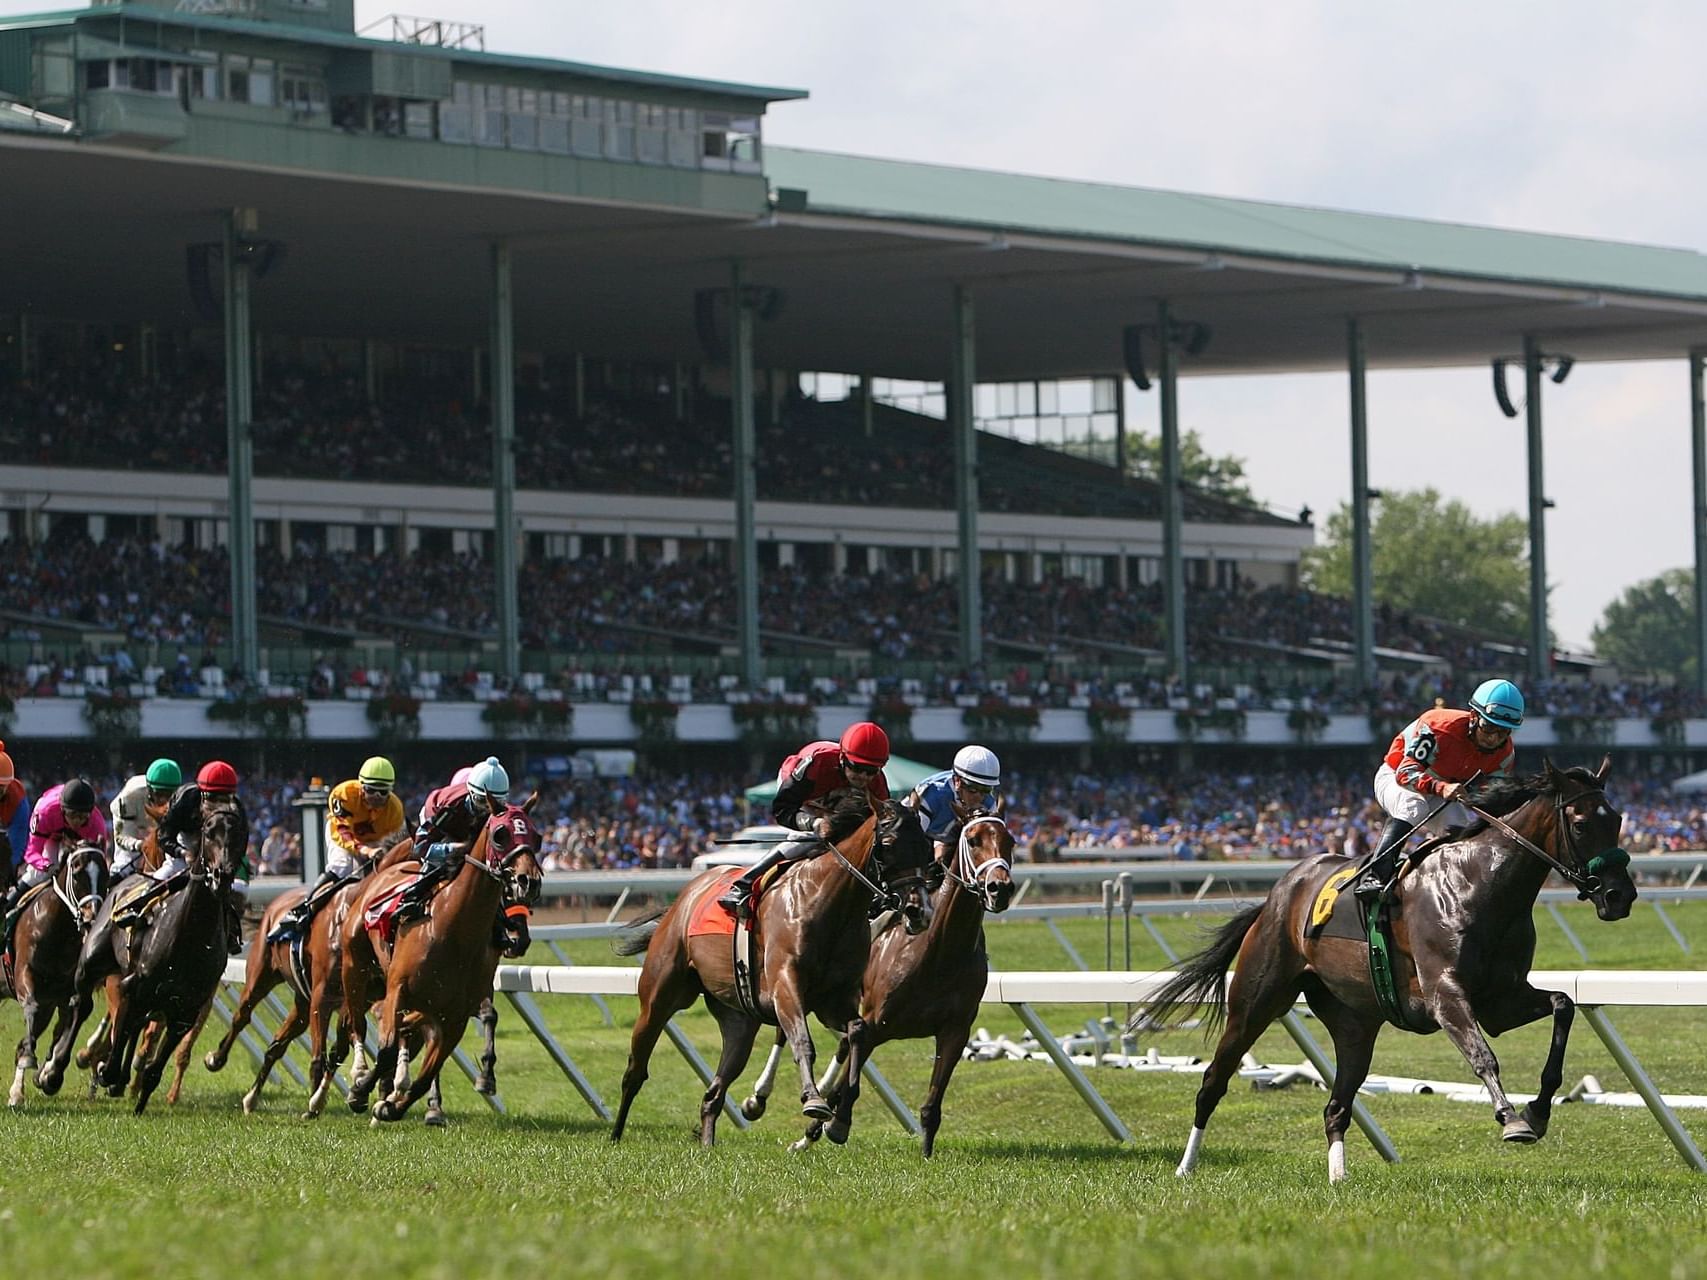 Horse Race in Monmouth Park near the Ocean Place